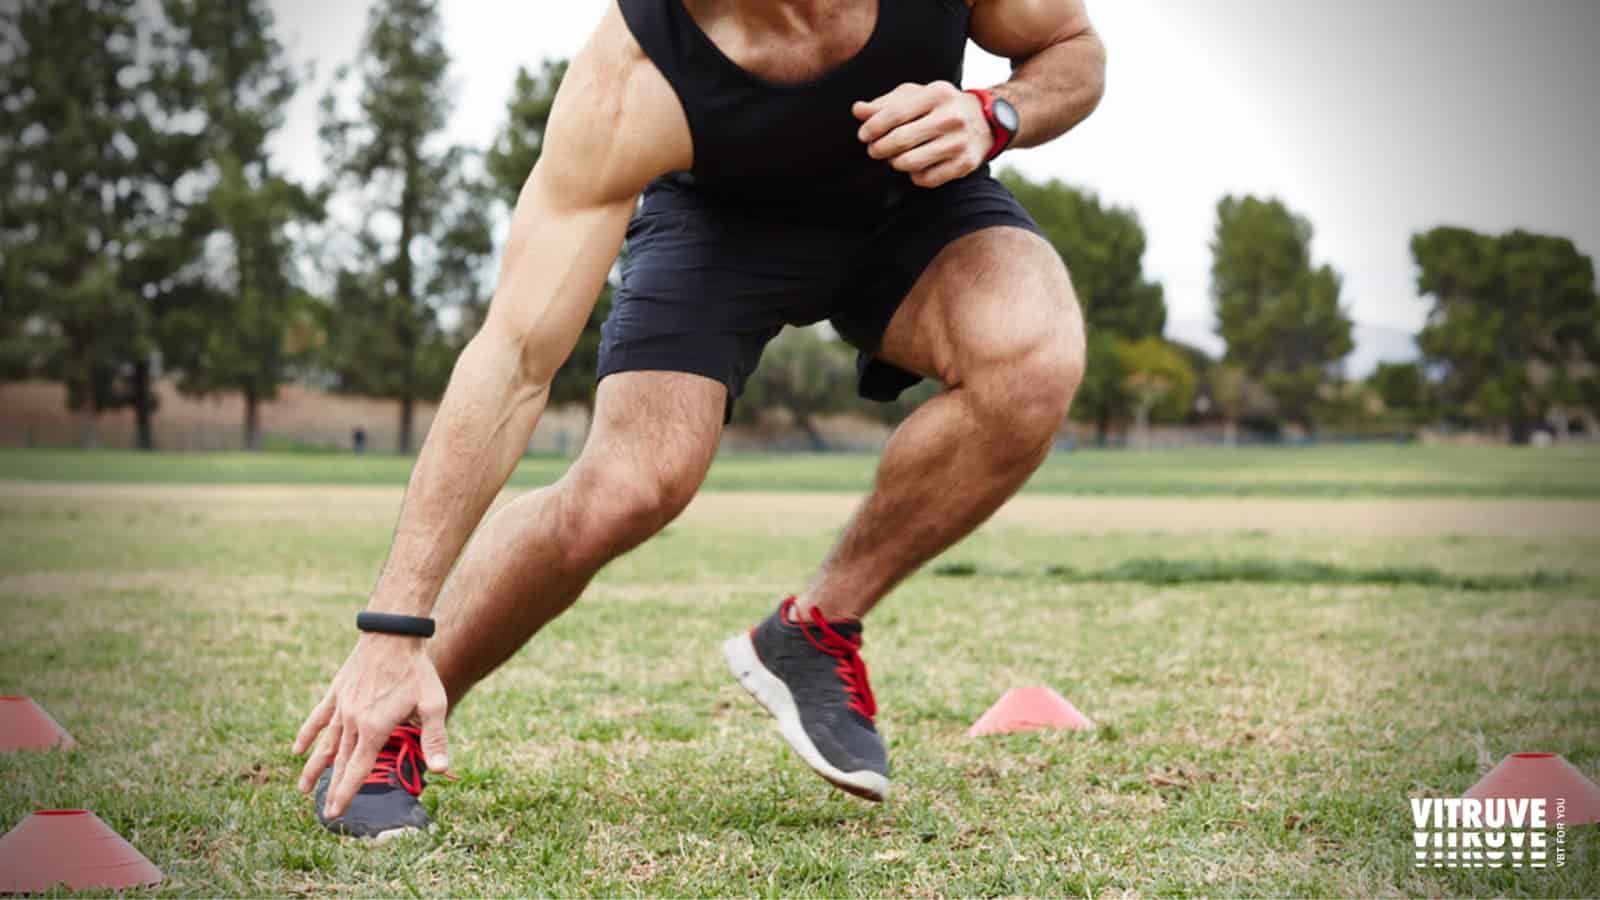 Speed Training: How To Increase Your Running Speed